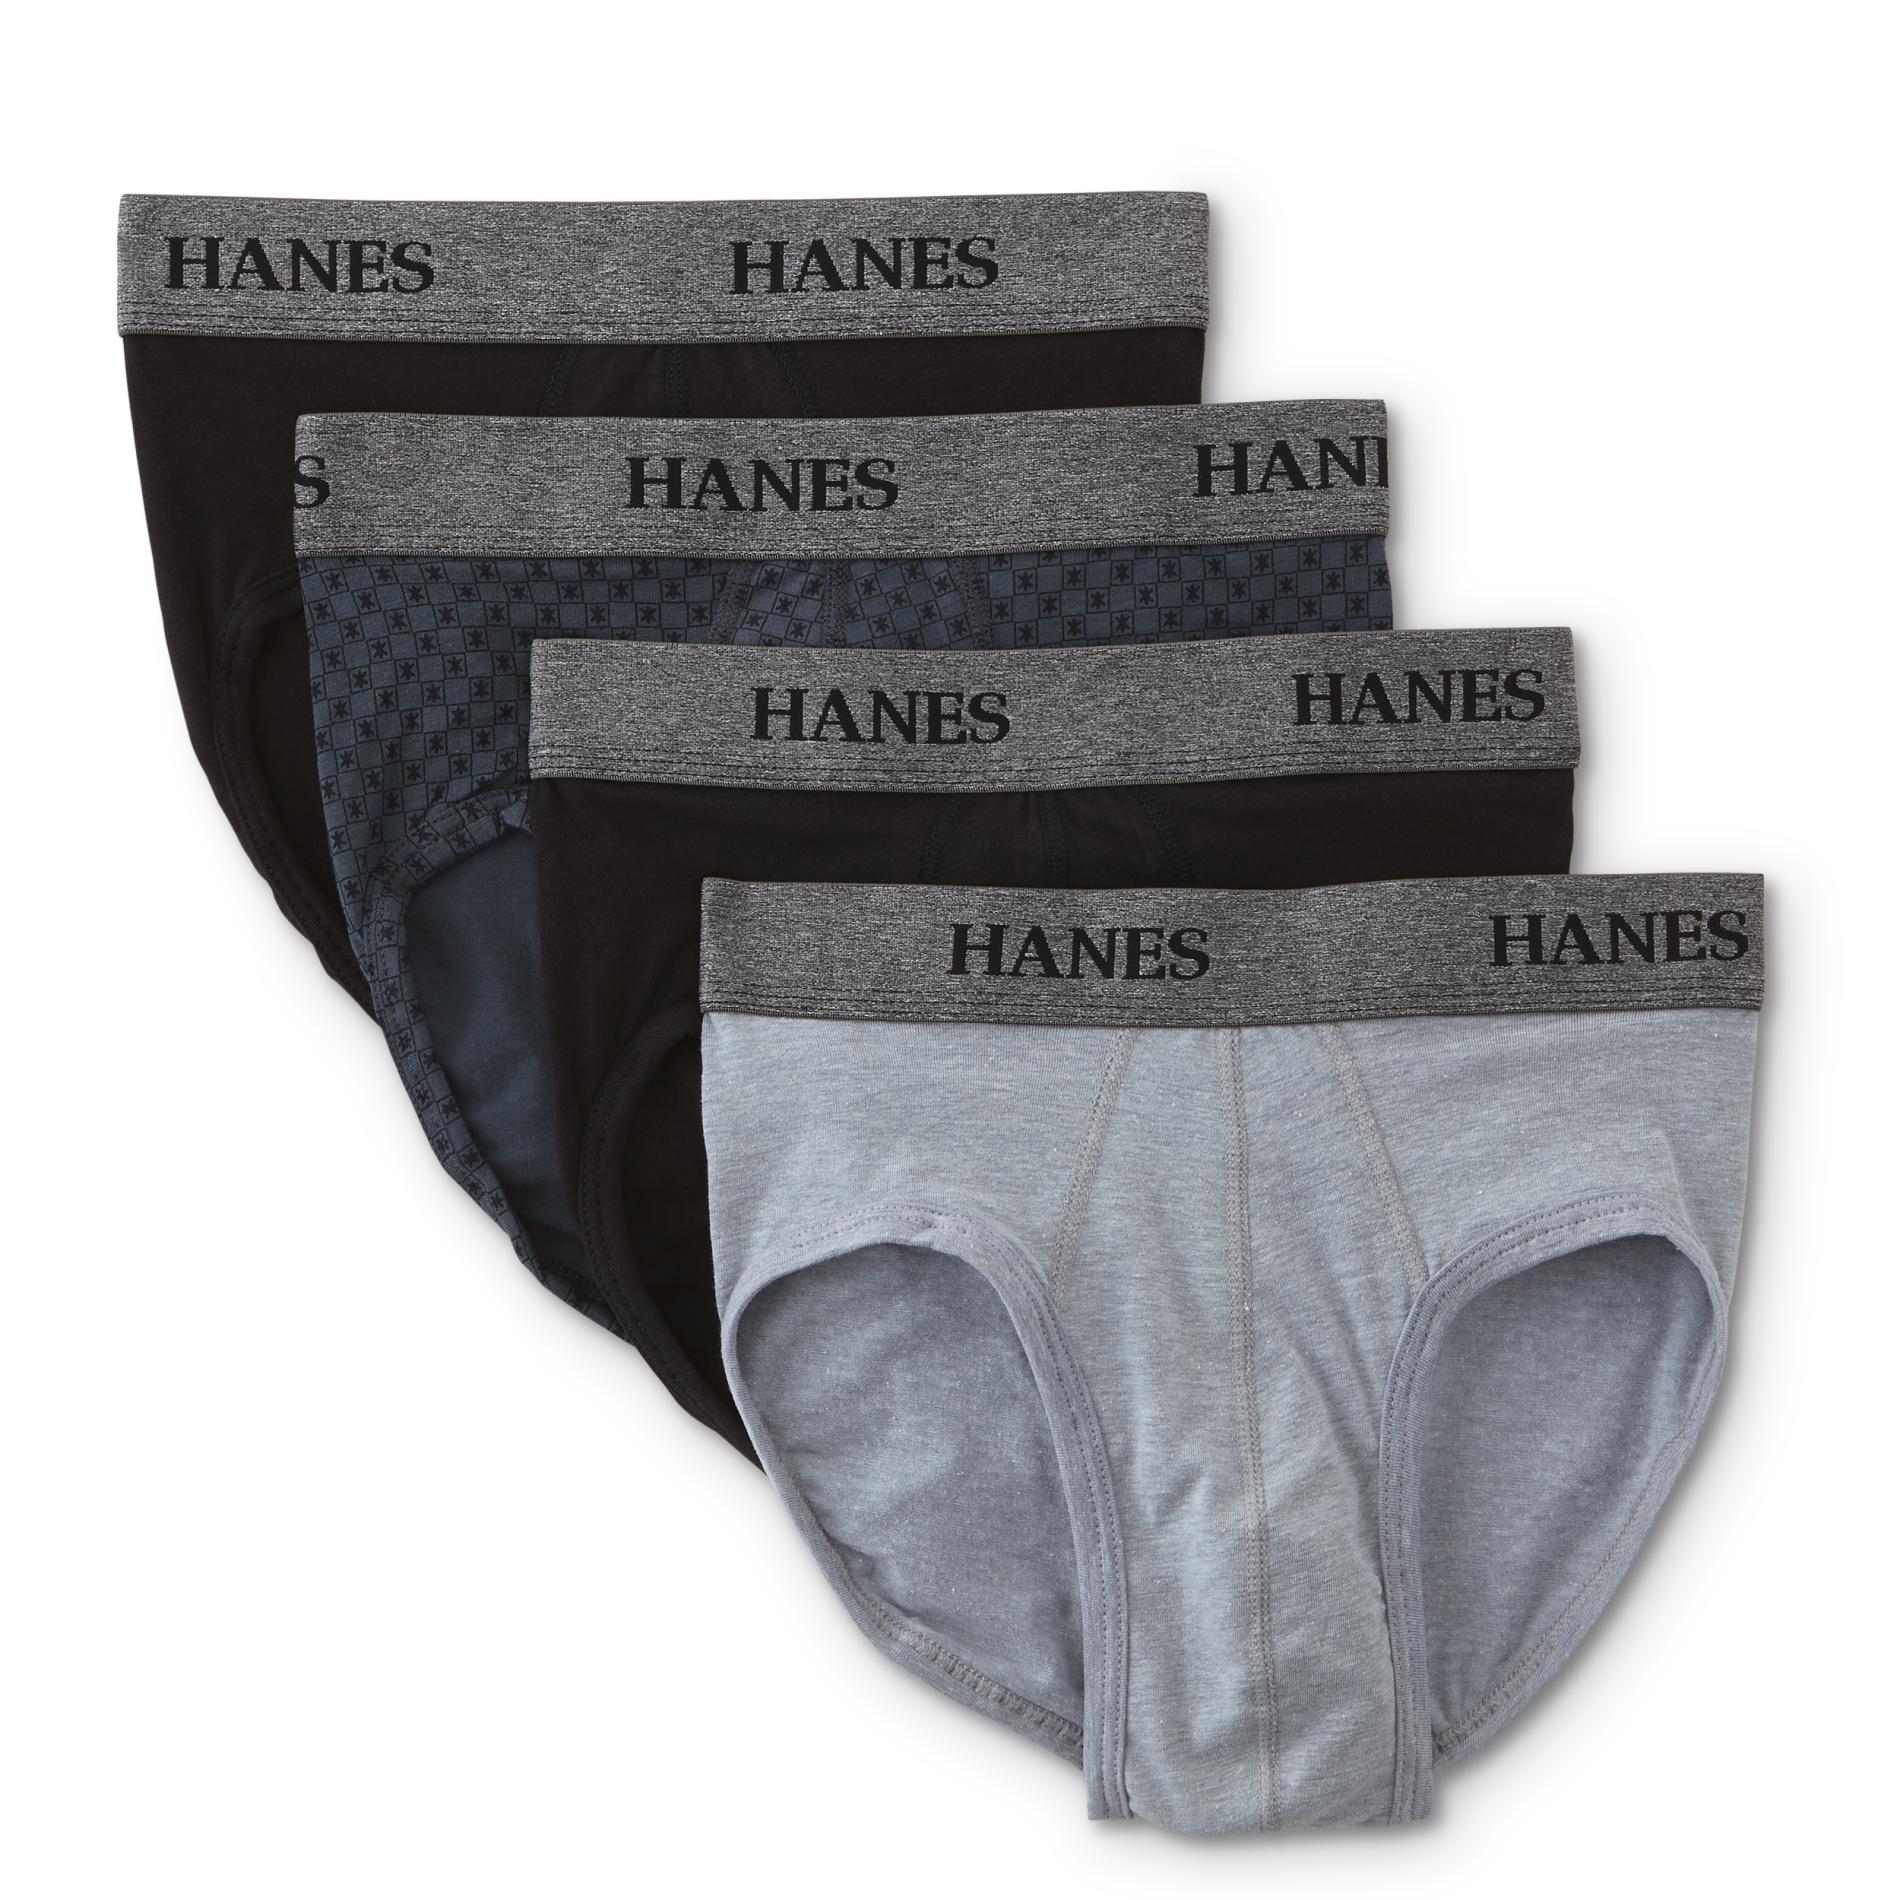 Hanes Men's 4-Pack Tagless Briefs - Assorted Colors